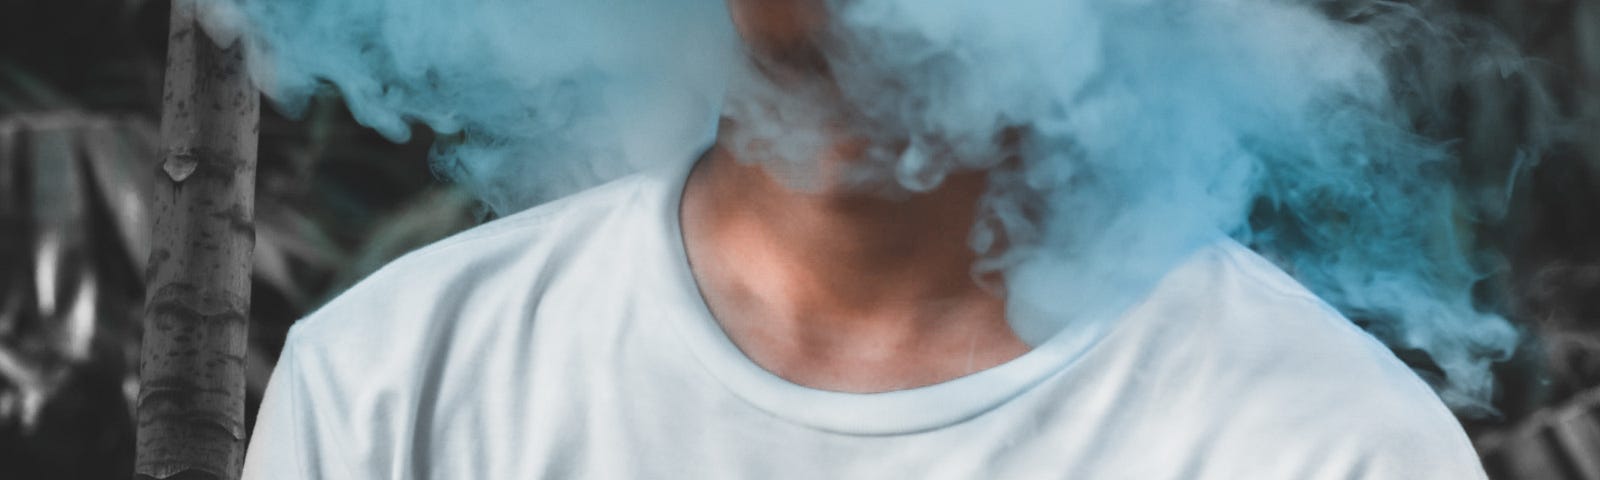 Person vaping; their face is obscured by a vape cloud and they look like a fool